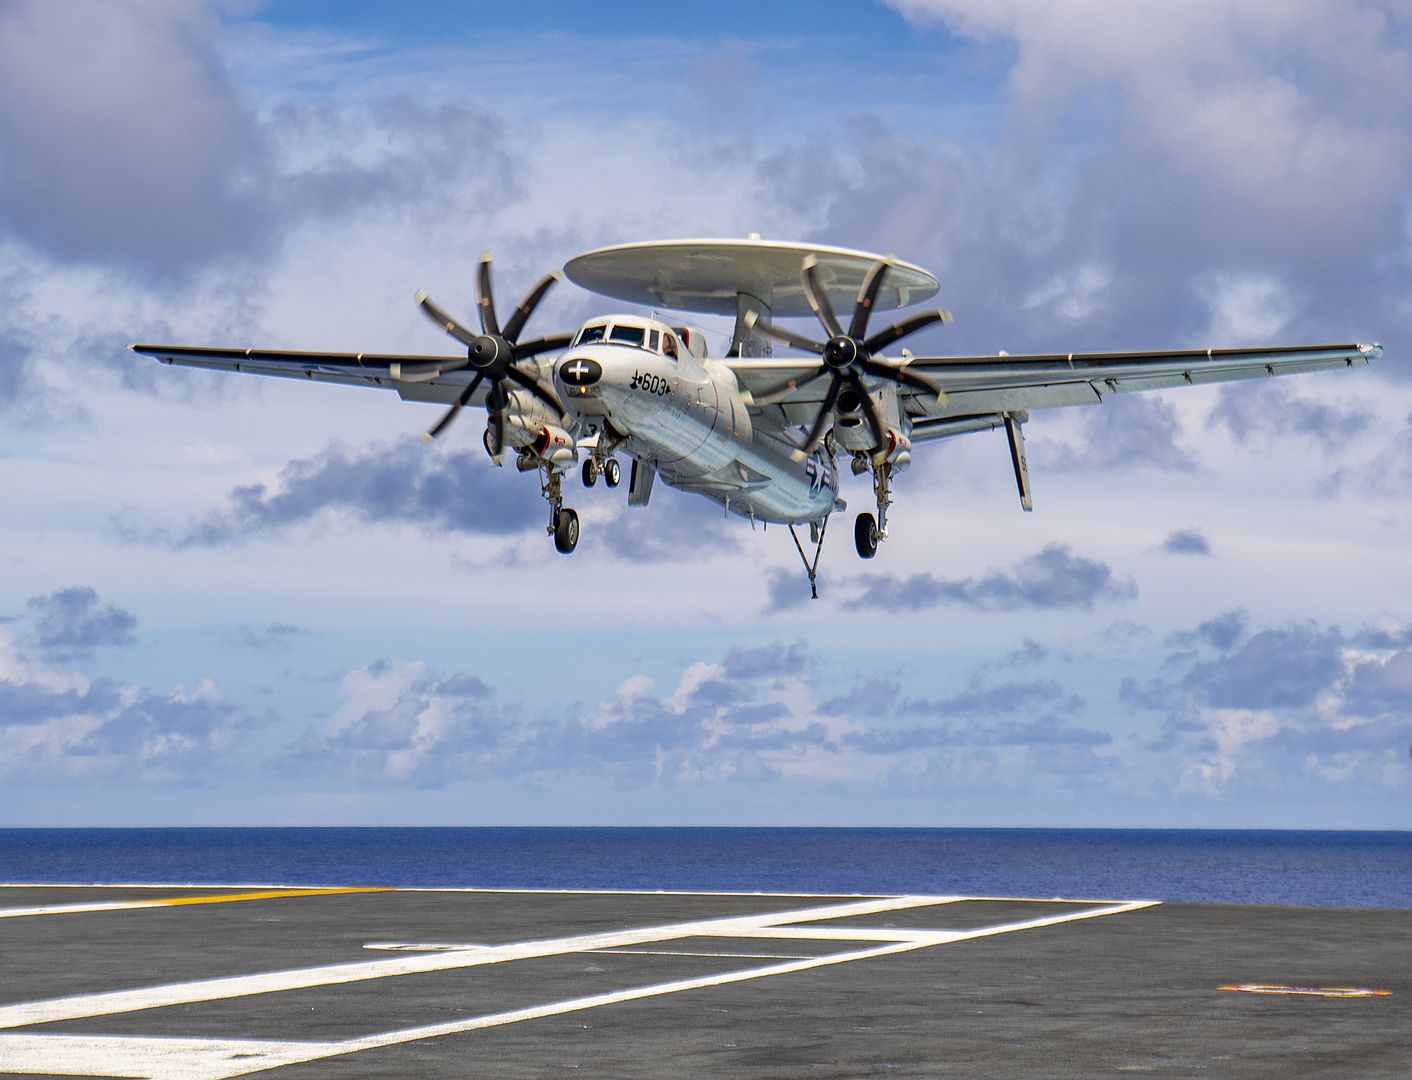 2C Hawkeye From The Sun Kings Of Carrier Airborne Early Warning Squadron 116 Prepares To Make An Arrested Landing On The Flight Deck Aboard The Aircraft Carrier USS Nimitz